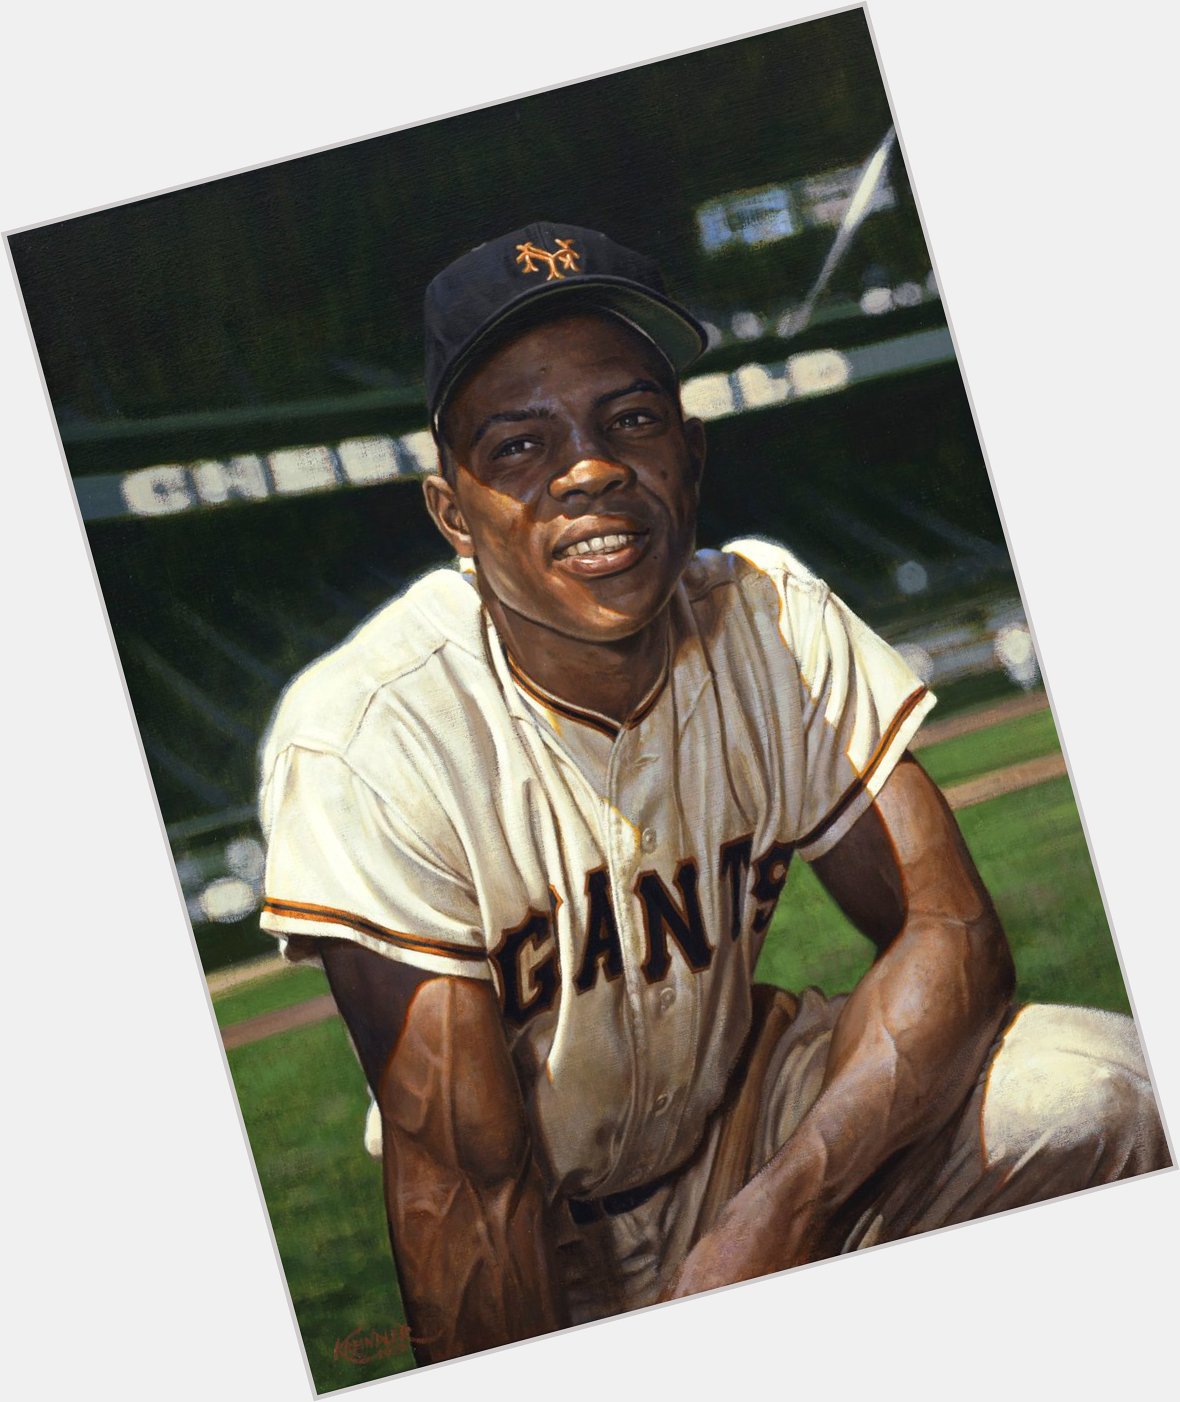 Room Rater Happy Birthday. Willie Mays was born this date in 1931. Happy 90th birthday! 